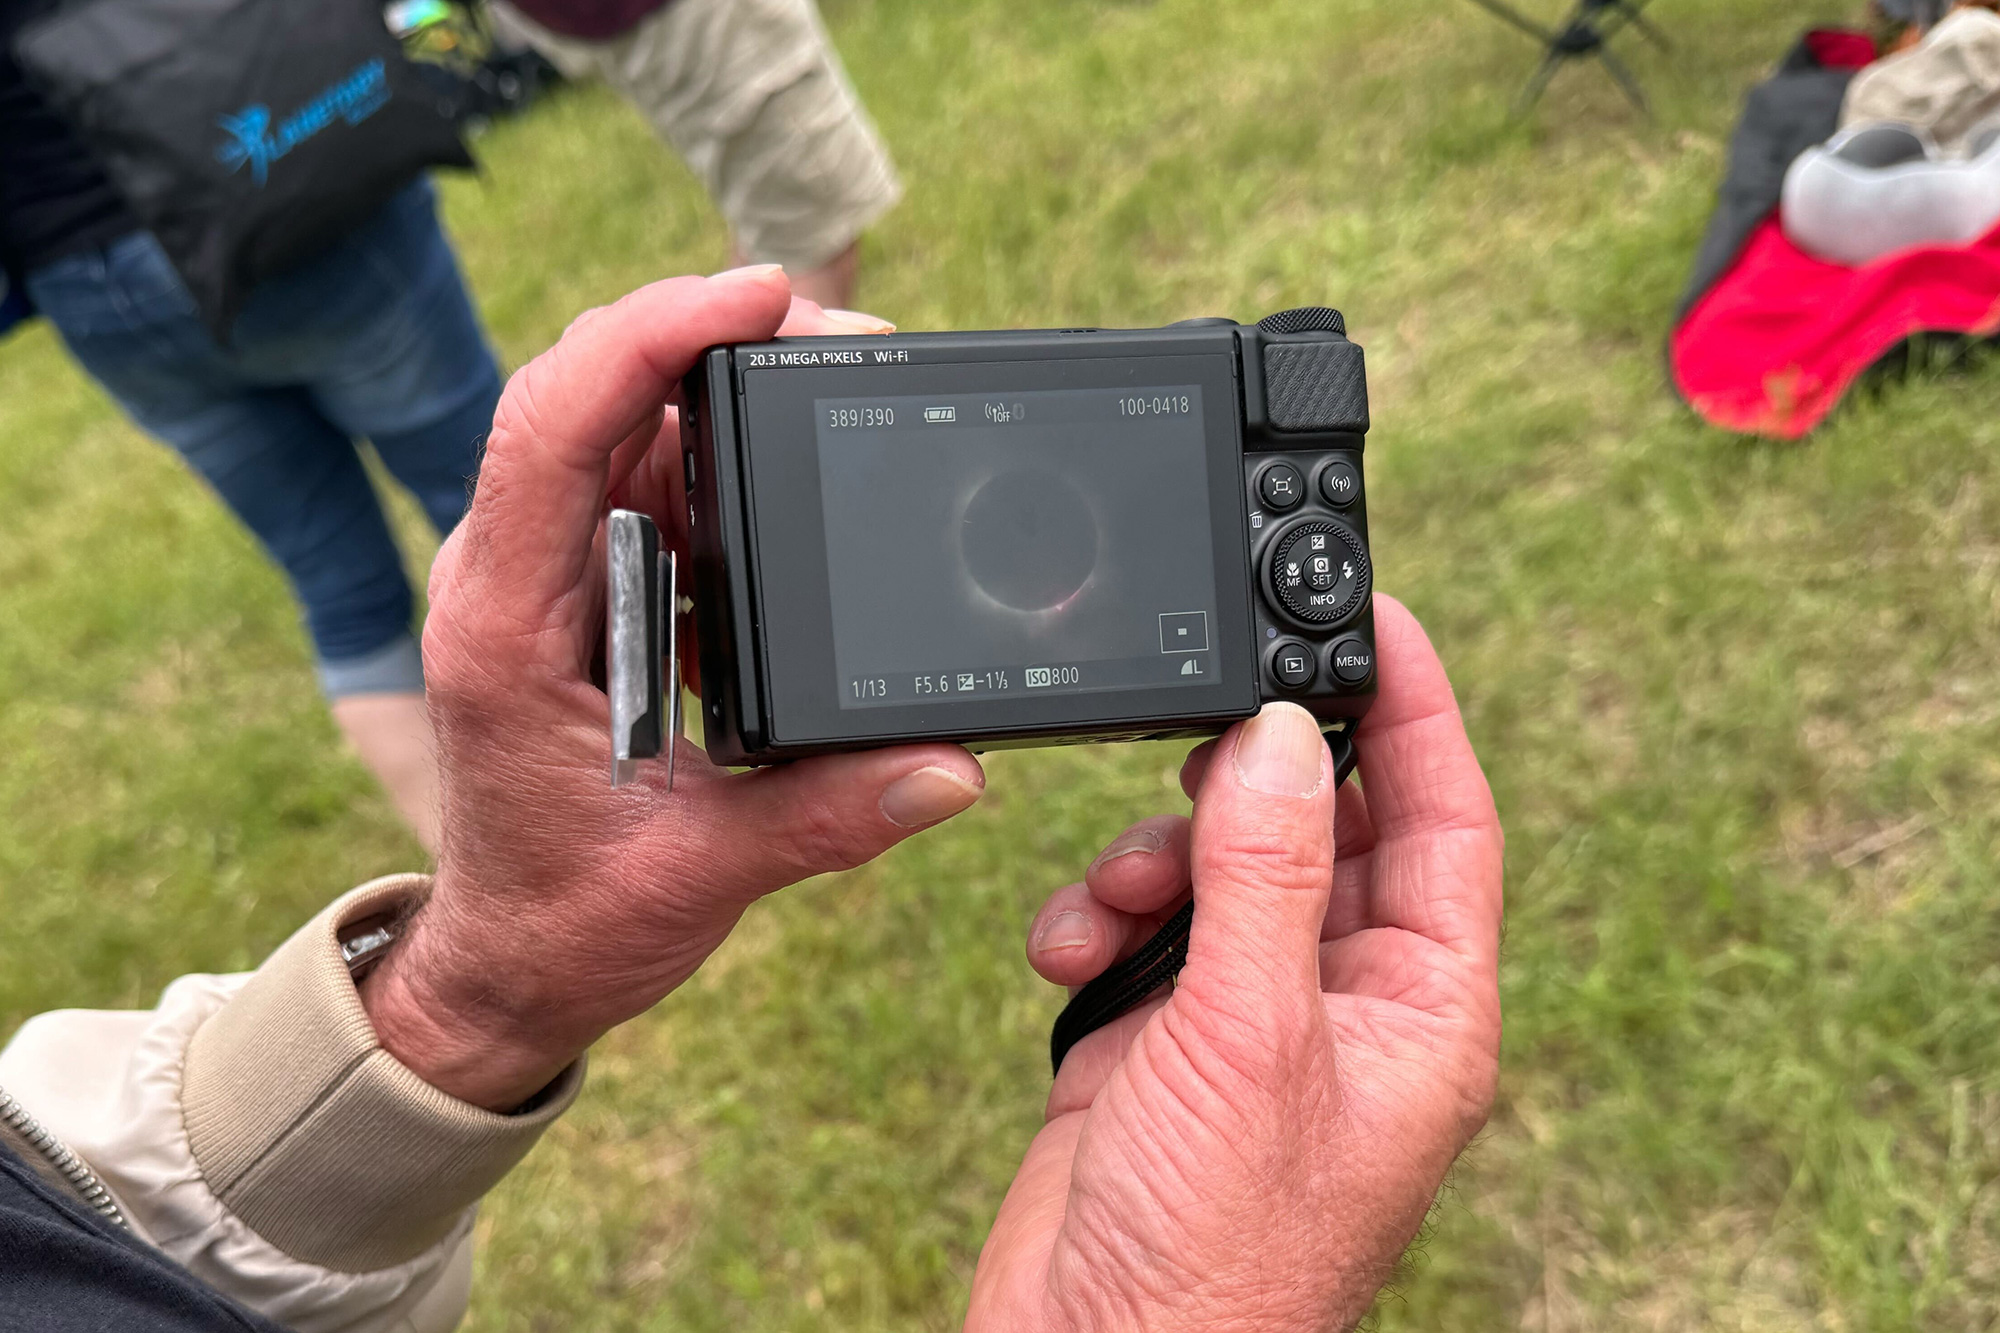 Canedo shows off his photos of totality.